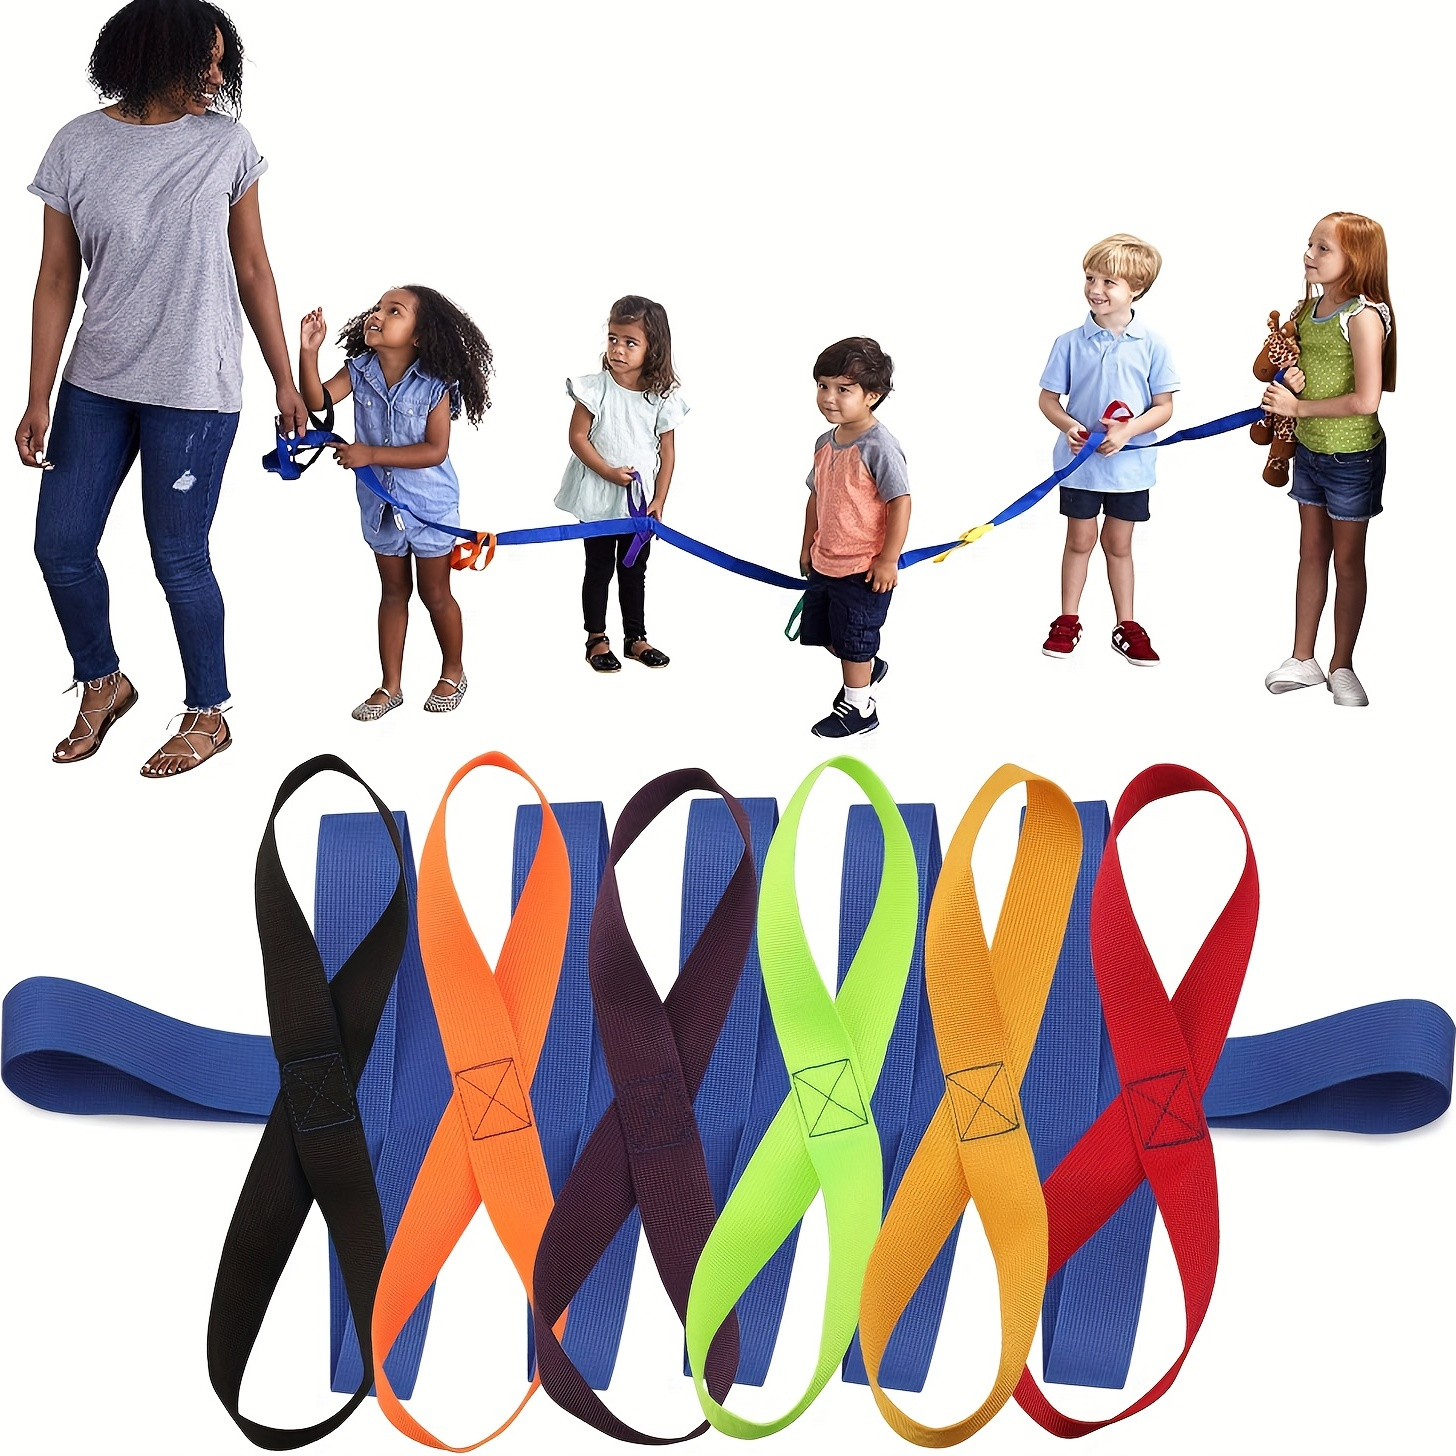 

1set Children Safety Walking Rope With 12 Colorful Handles Outdoor Safety Daycare Rope For Preschool Daycare Kindergarten School Kids Children (blue) Christmas, Halloween, Thanksgiving Day Gift